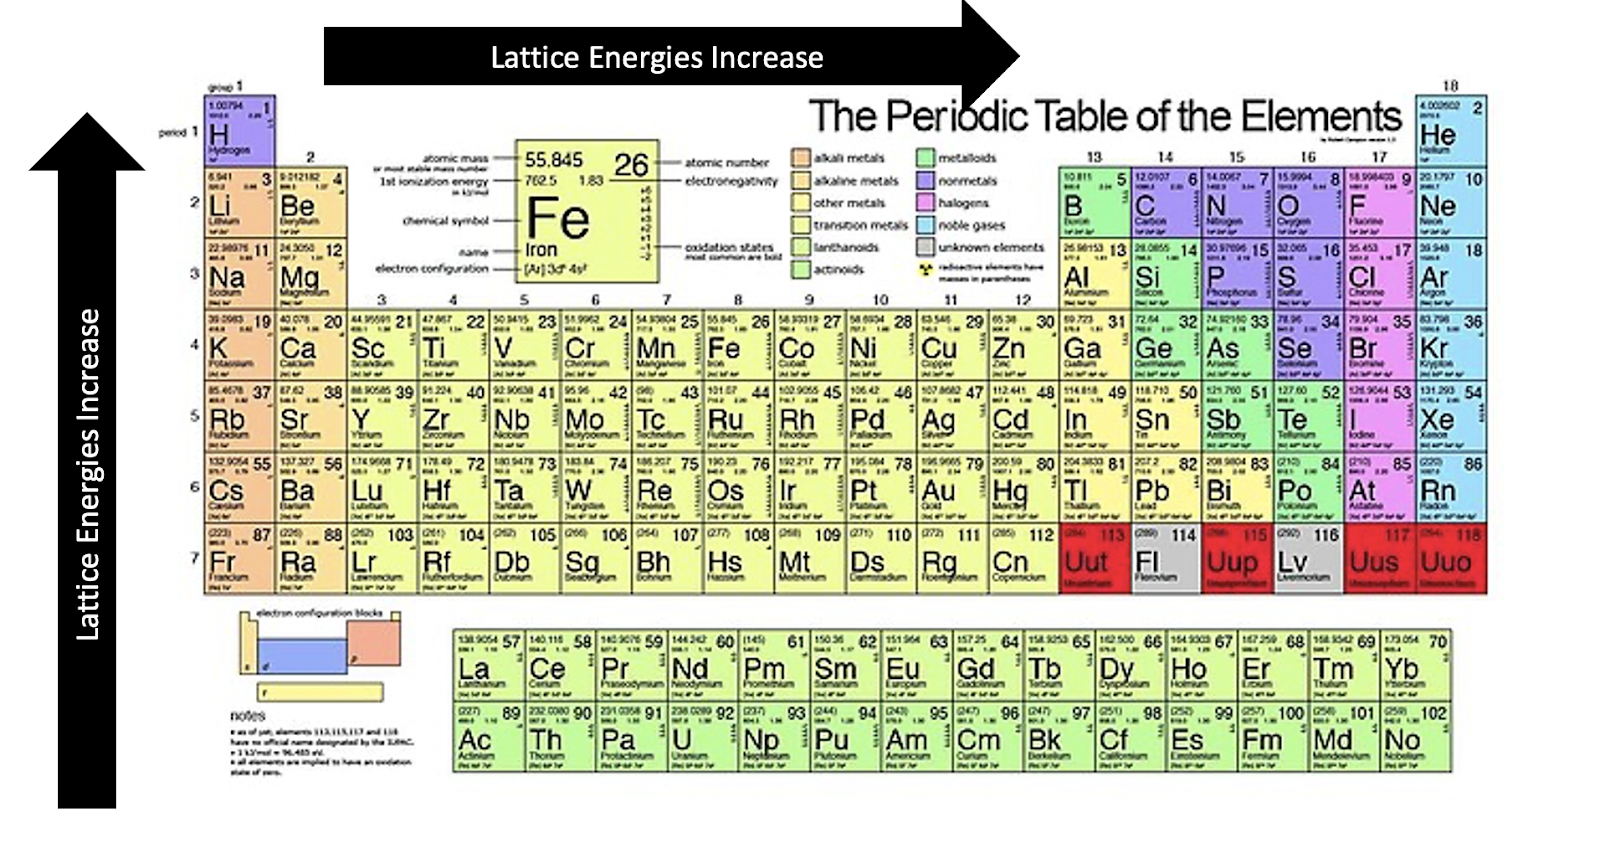 Learn all about lattice energy, including its definition, periodic table trends & charts, influential factors, and calculations